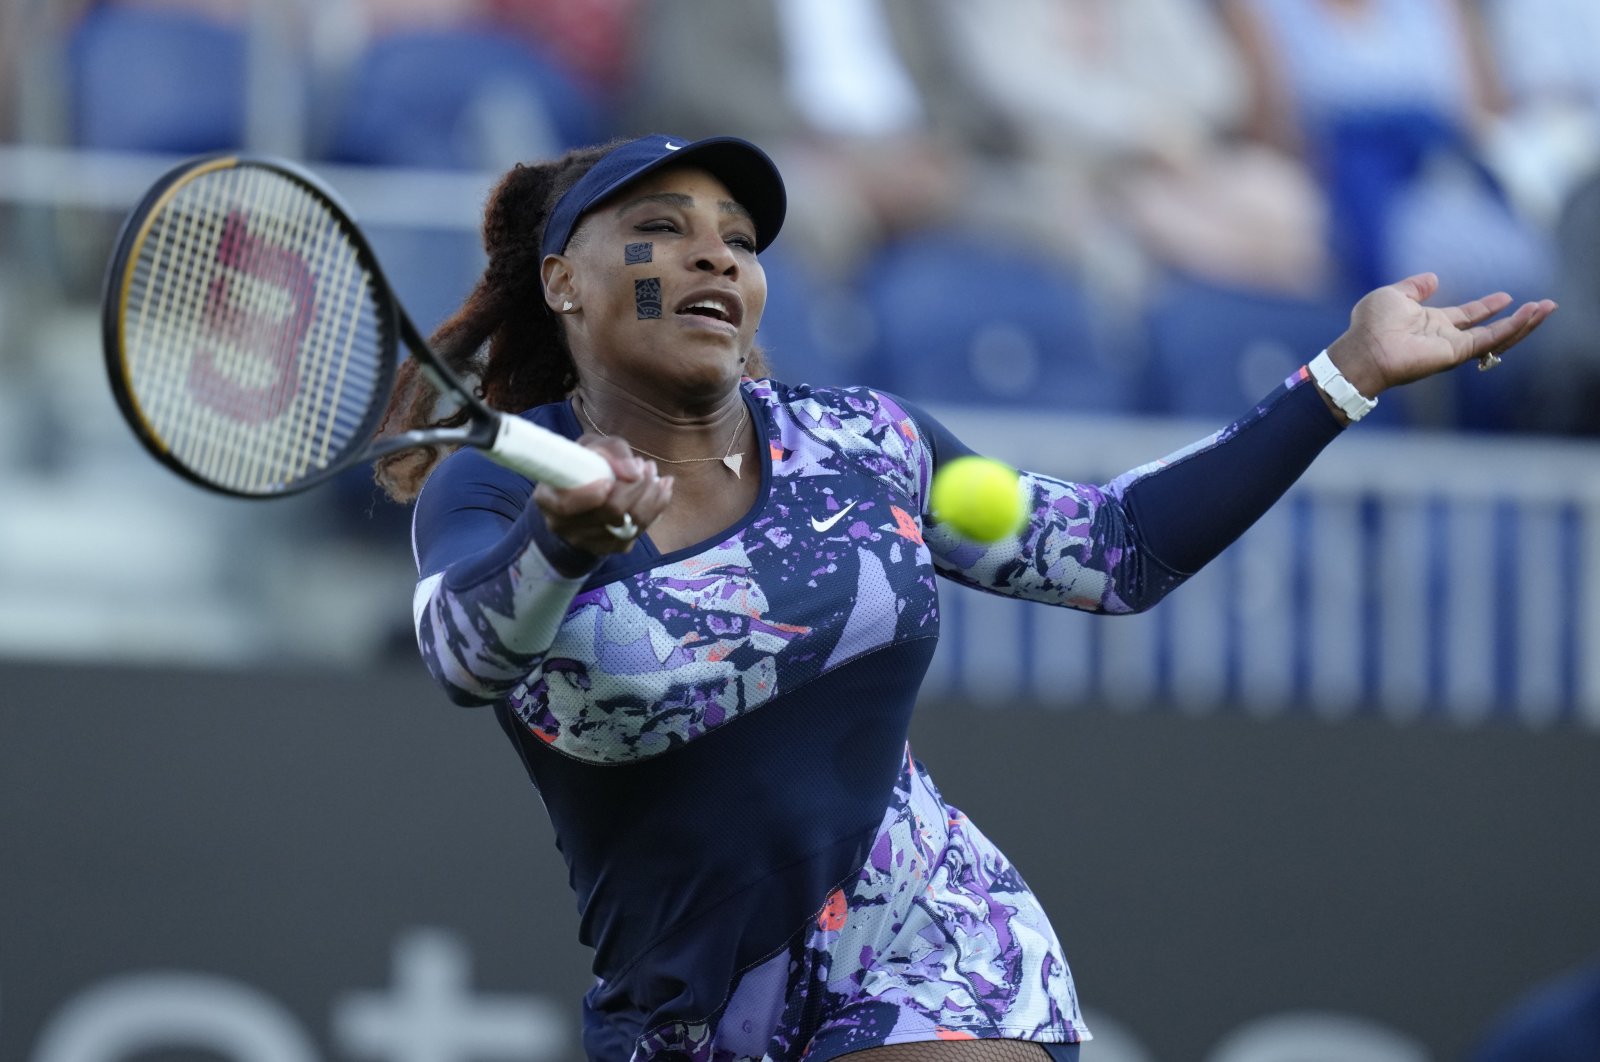 U.S. Serena Williams in action at the Eastbourne International, Eastbourne, England, June 22, 2022. (AP Photo)